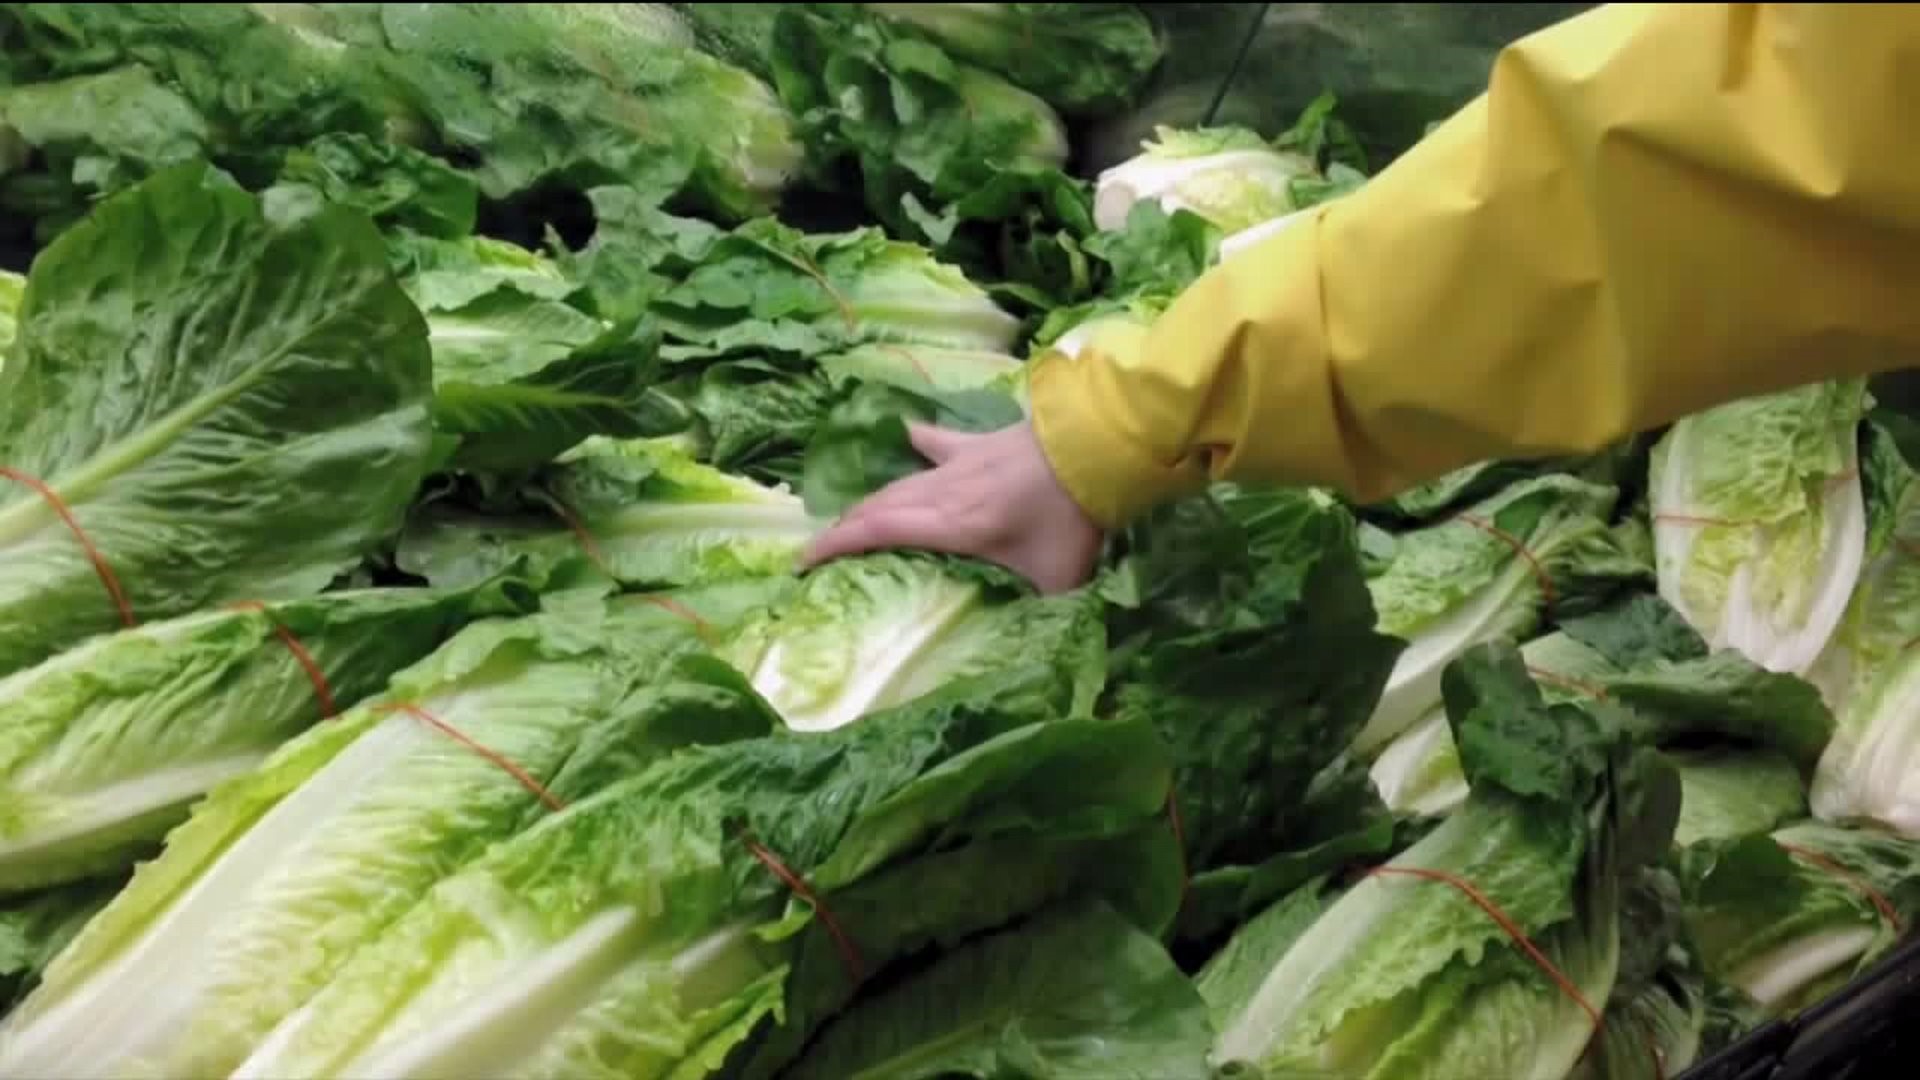 Businesses, Shoppers Affected by Romaine Lettuce Warning